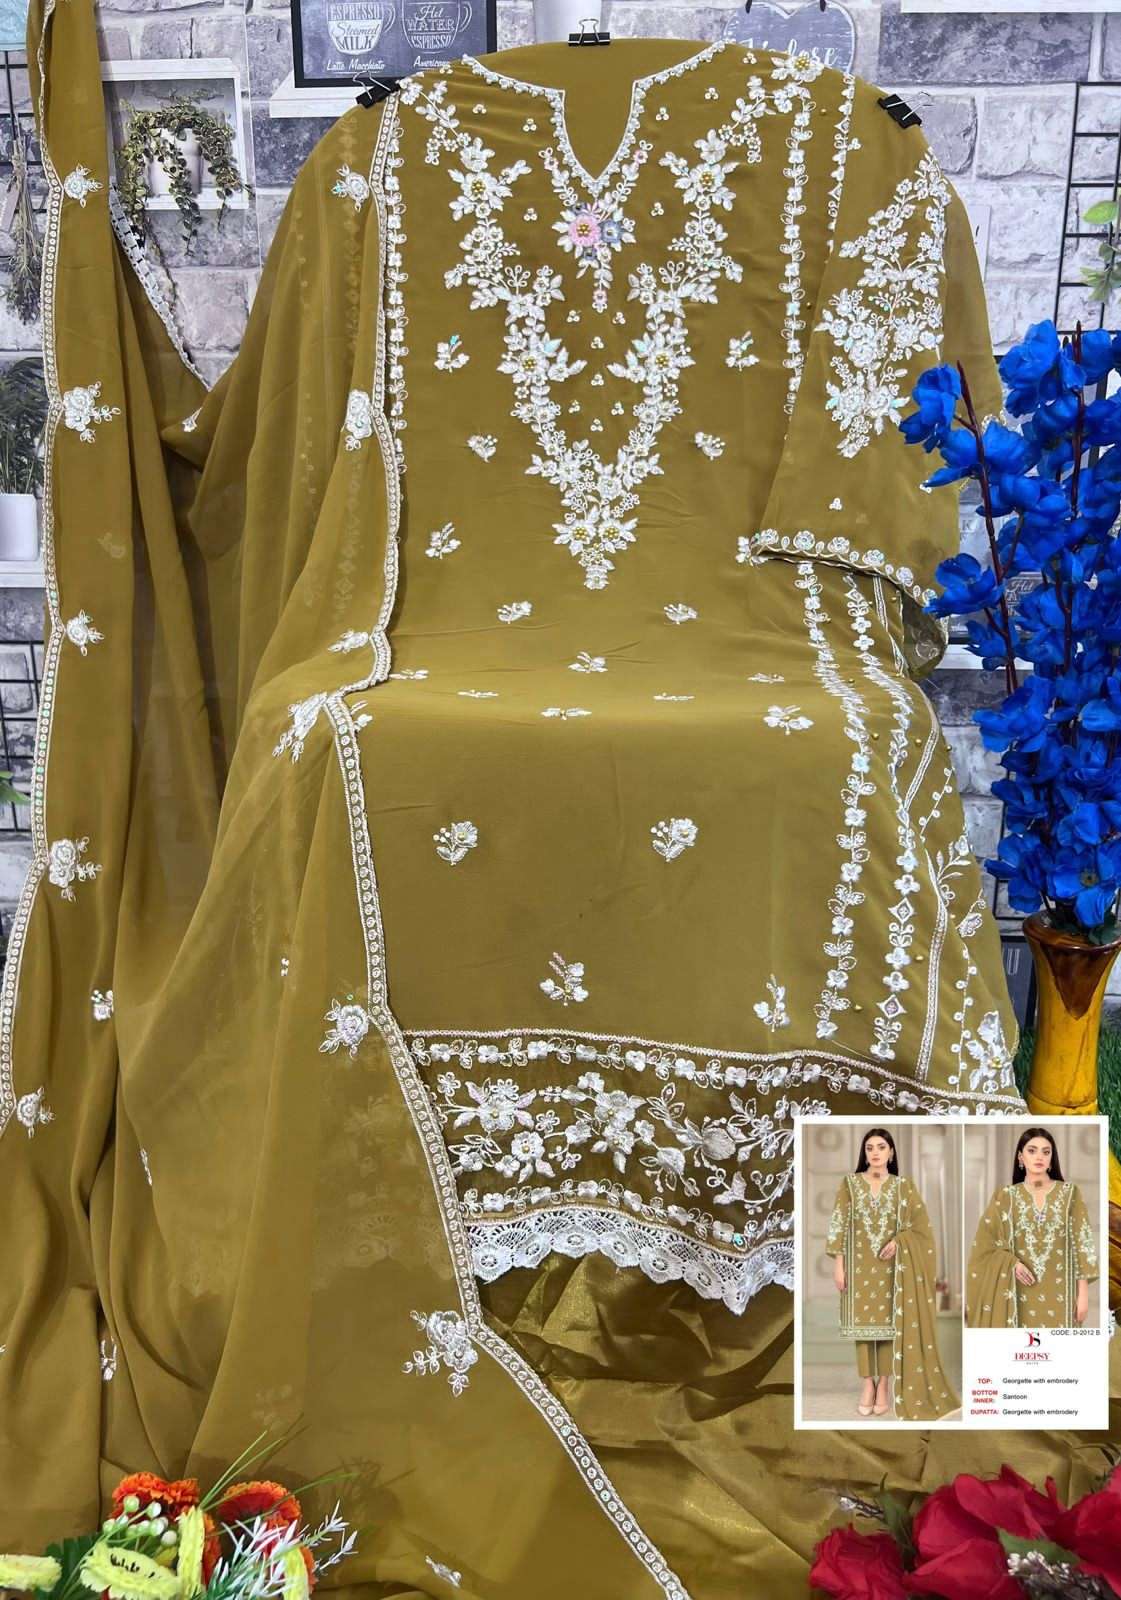 fepic 2012 colour series georgette pakistani embroidred suits online rate